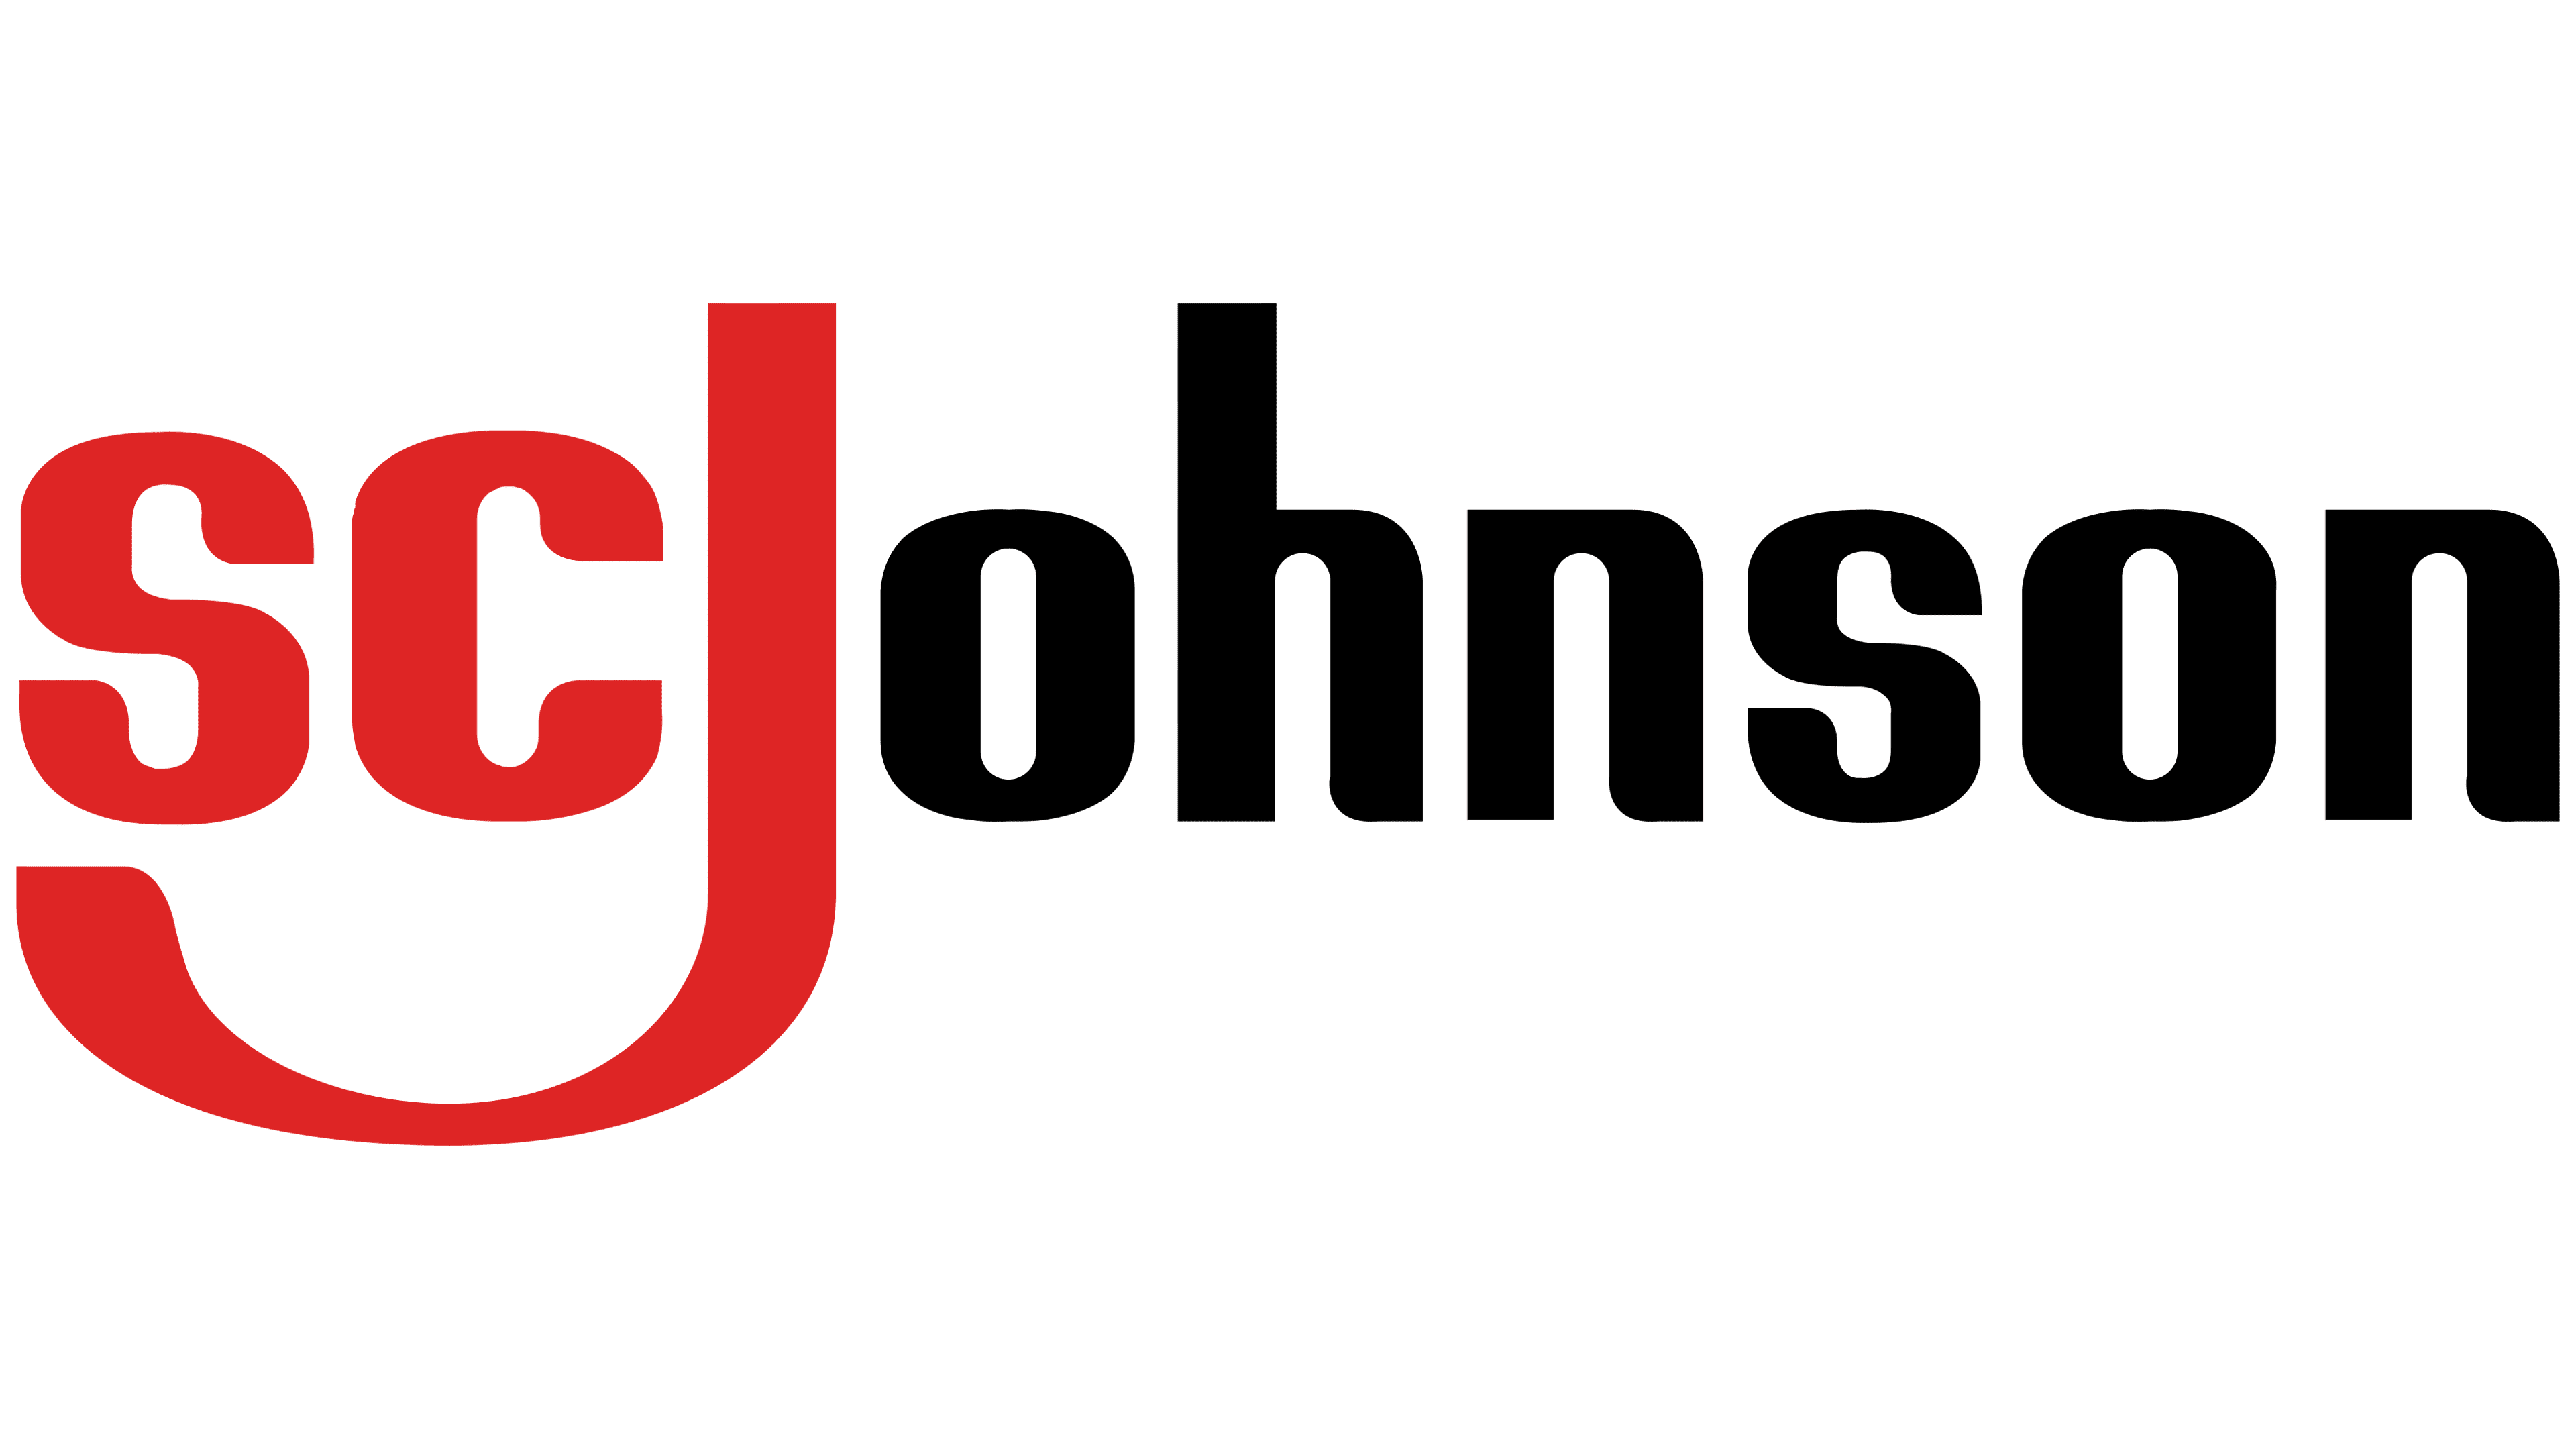 S. C. Johnson Logo, symbol, meaning, history, PNG, brand